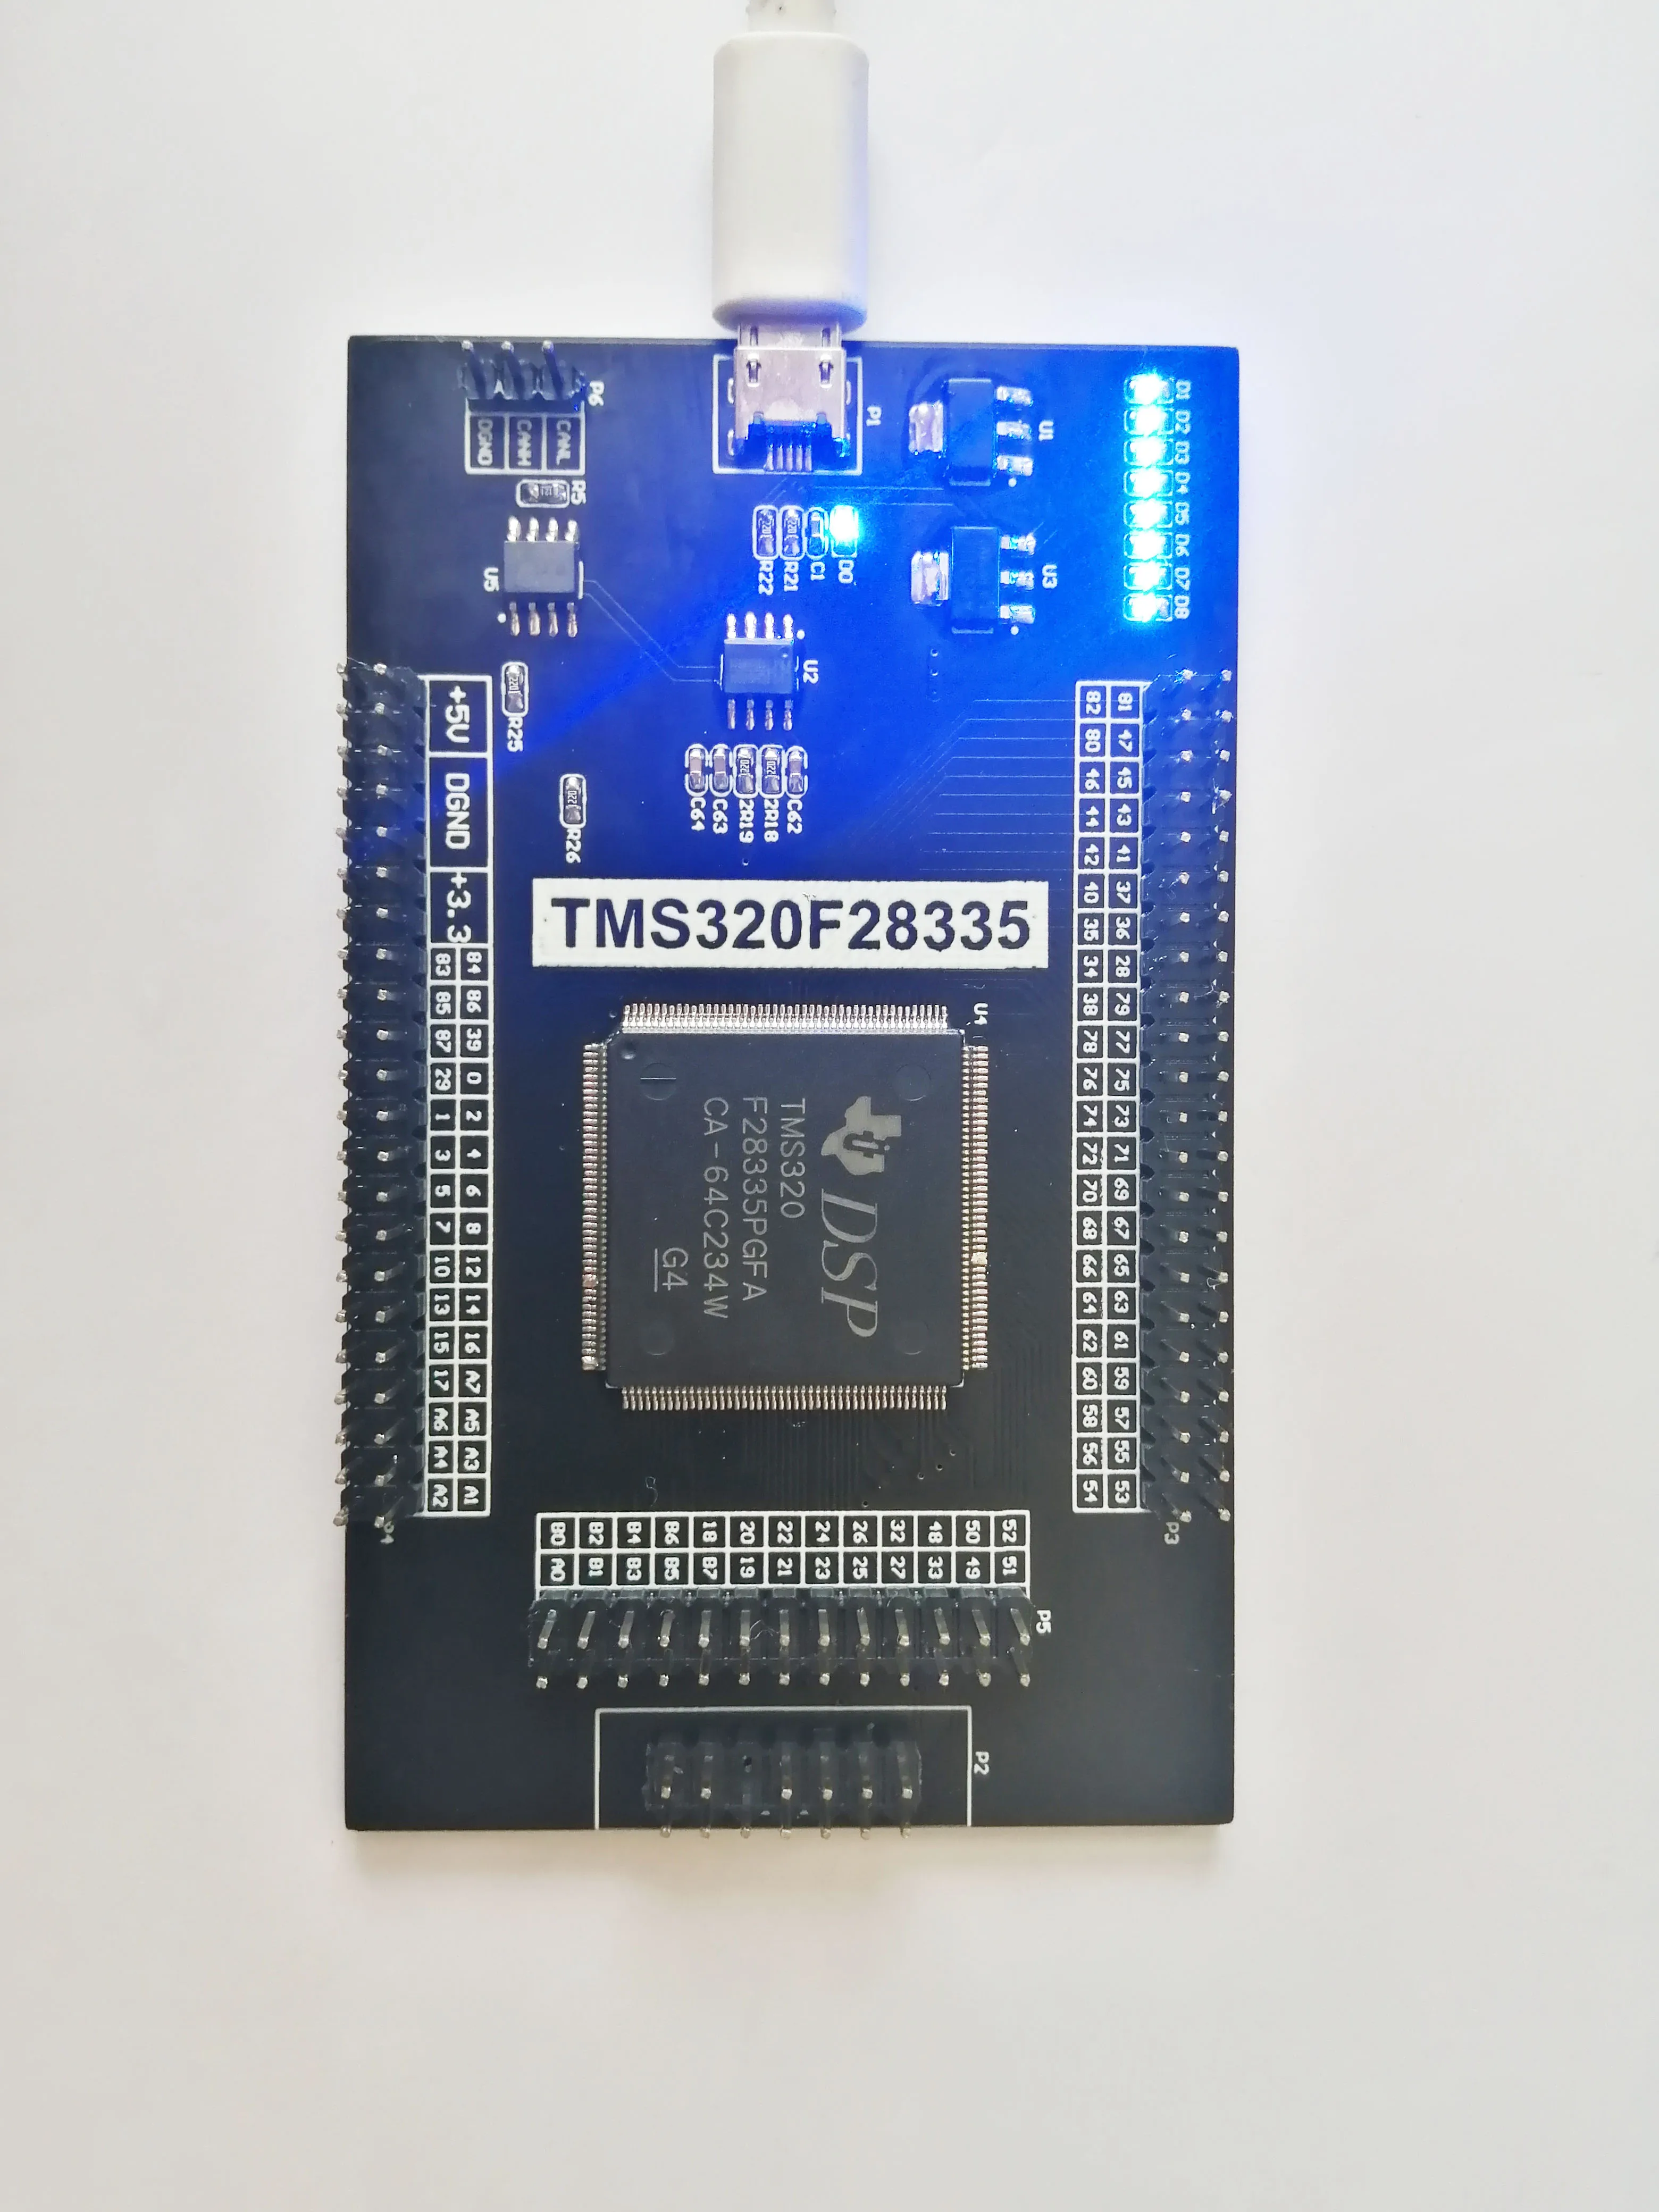 TMS320F28335 DSP development board USB to serial port to CAN communication